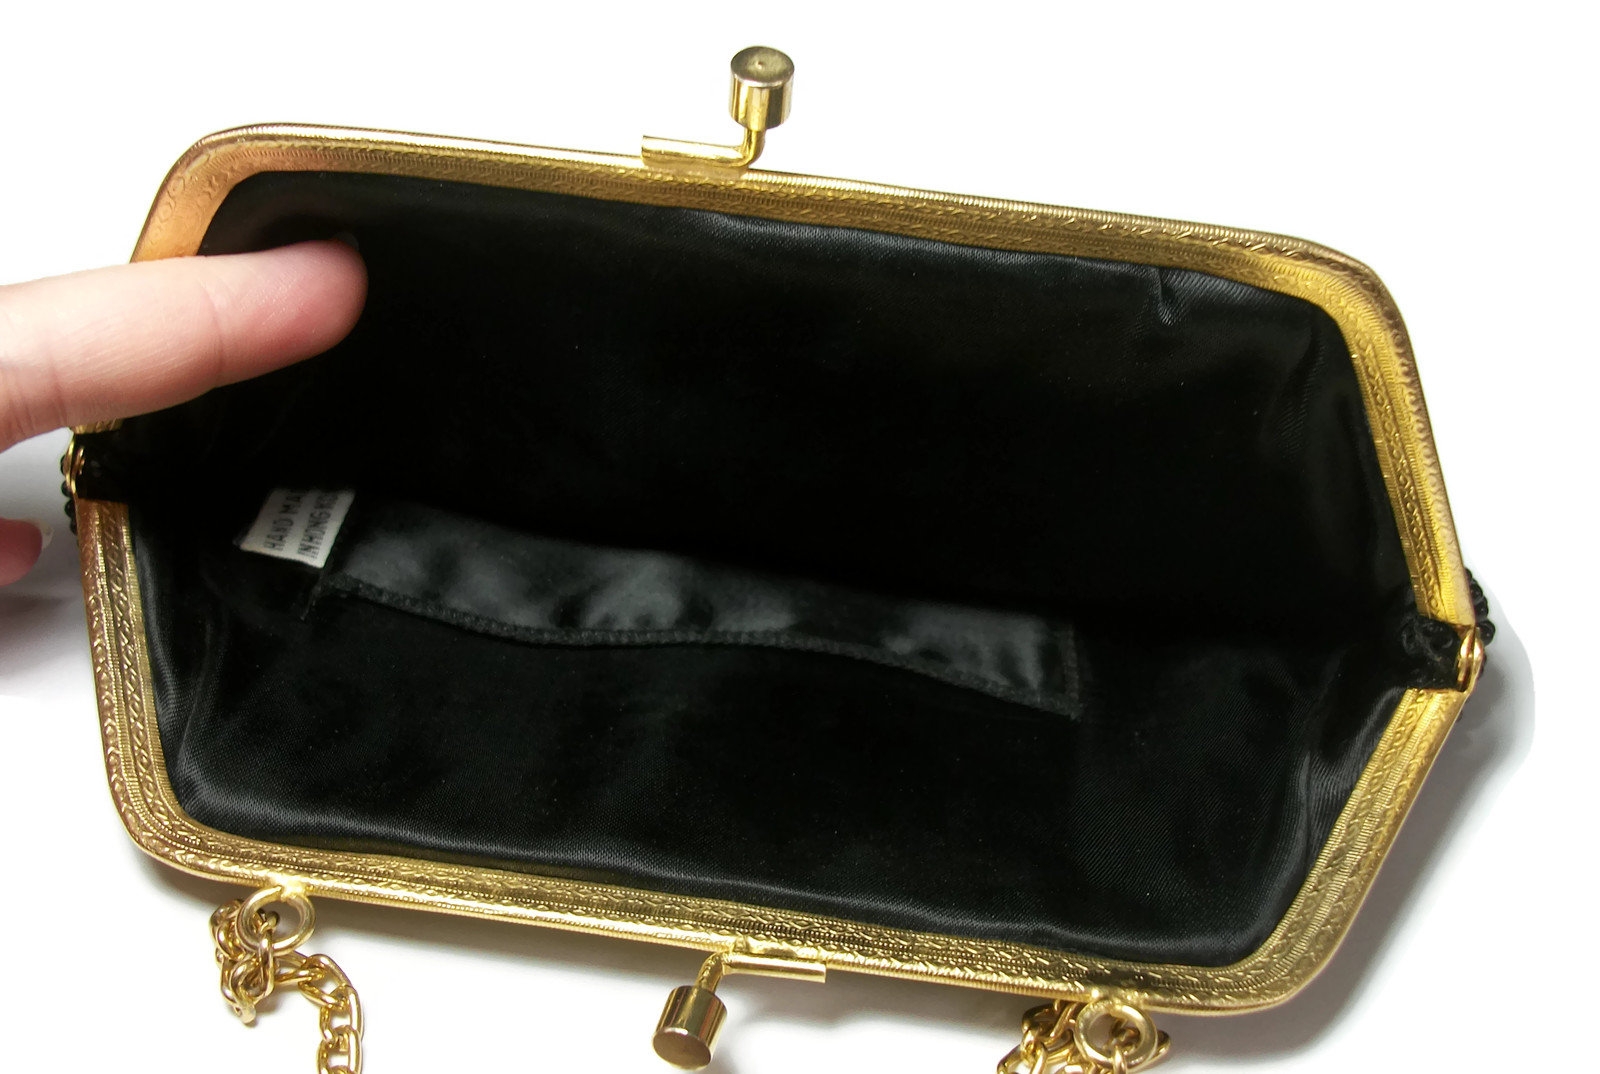 Vintage Black Beaded Evening Bag Clutch Purse With Chain strap: Hand-made